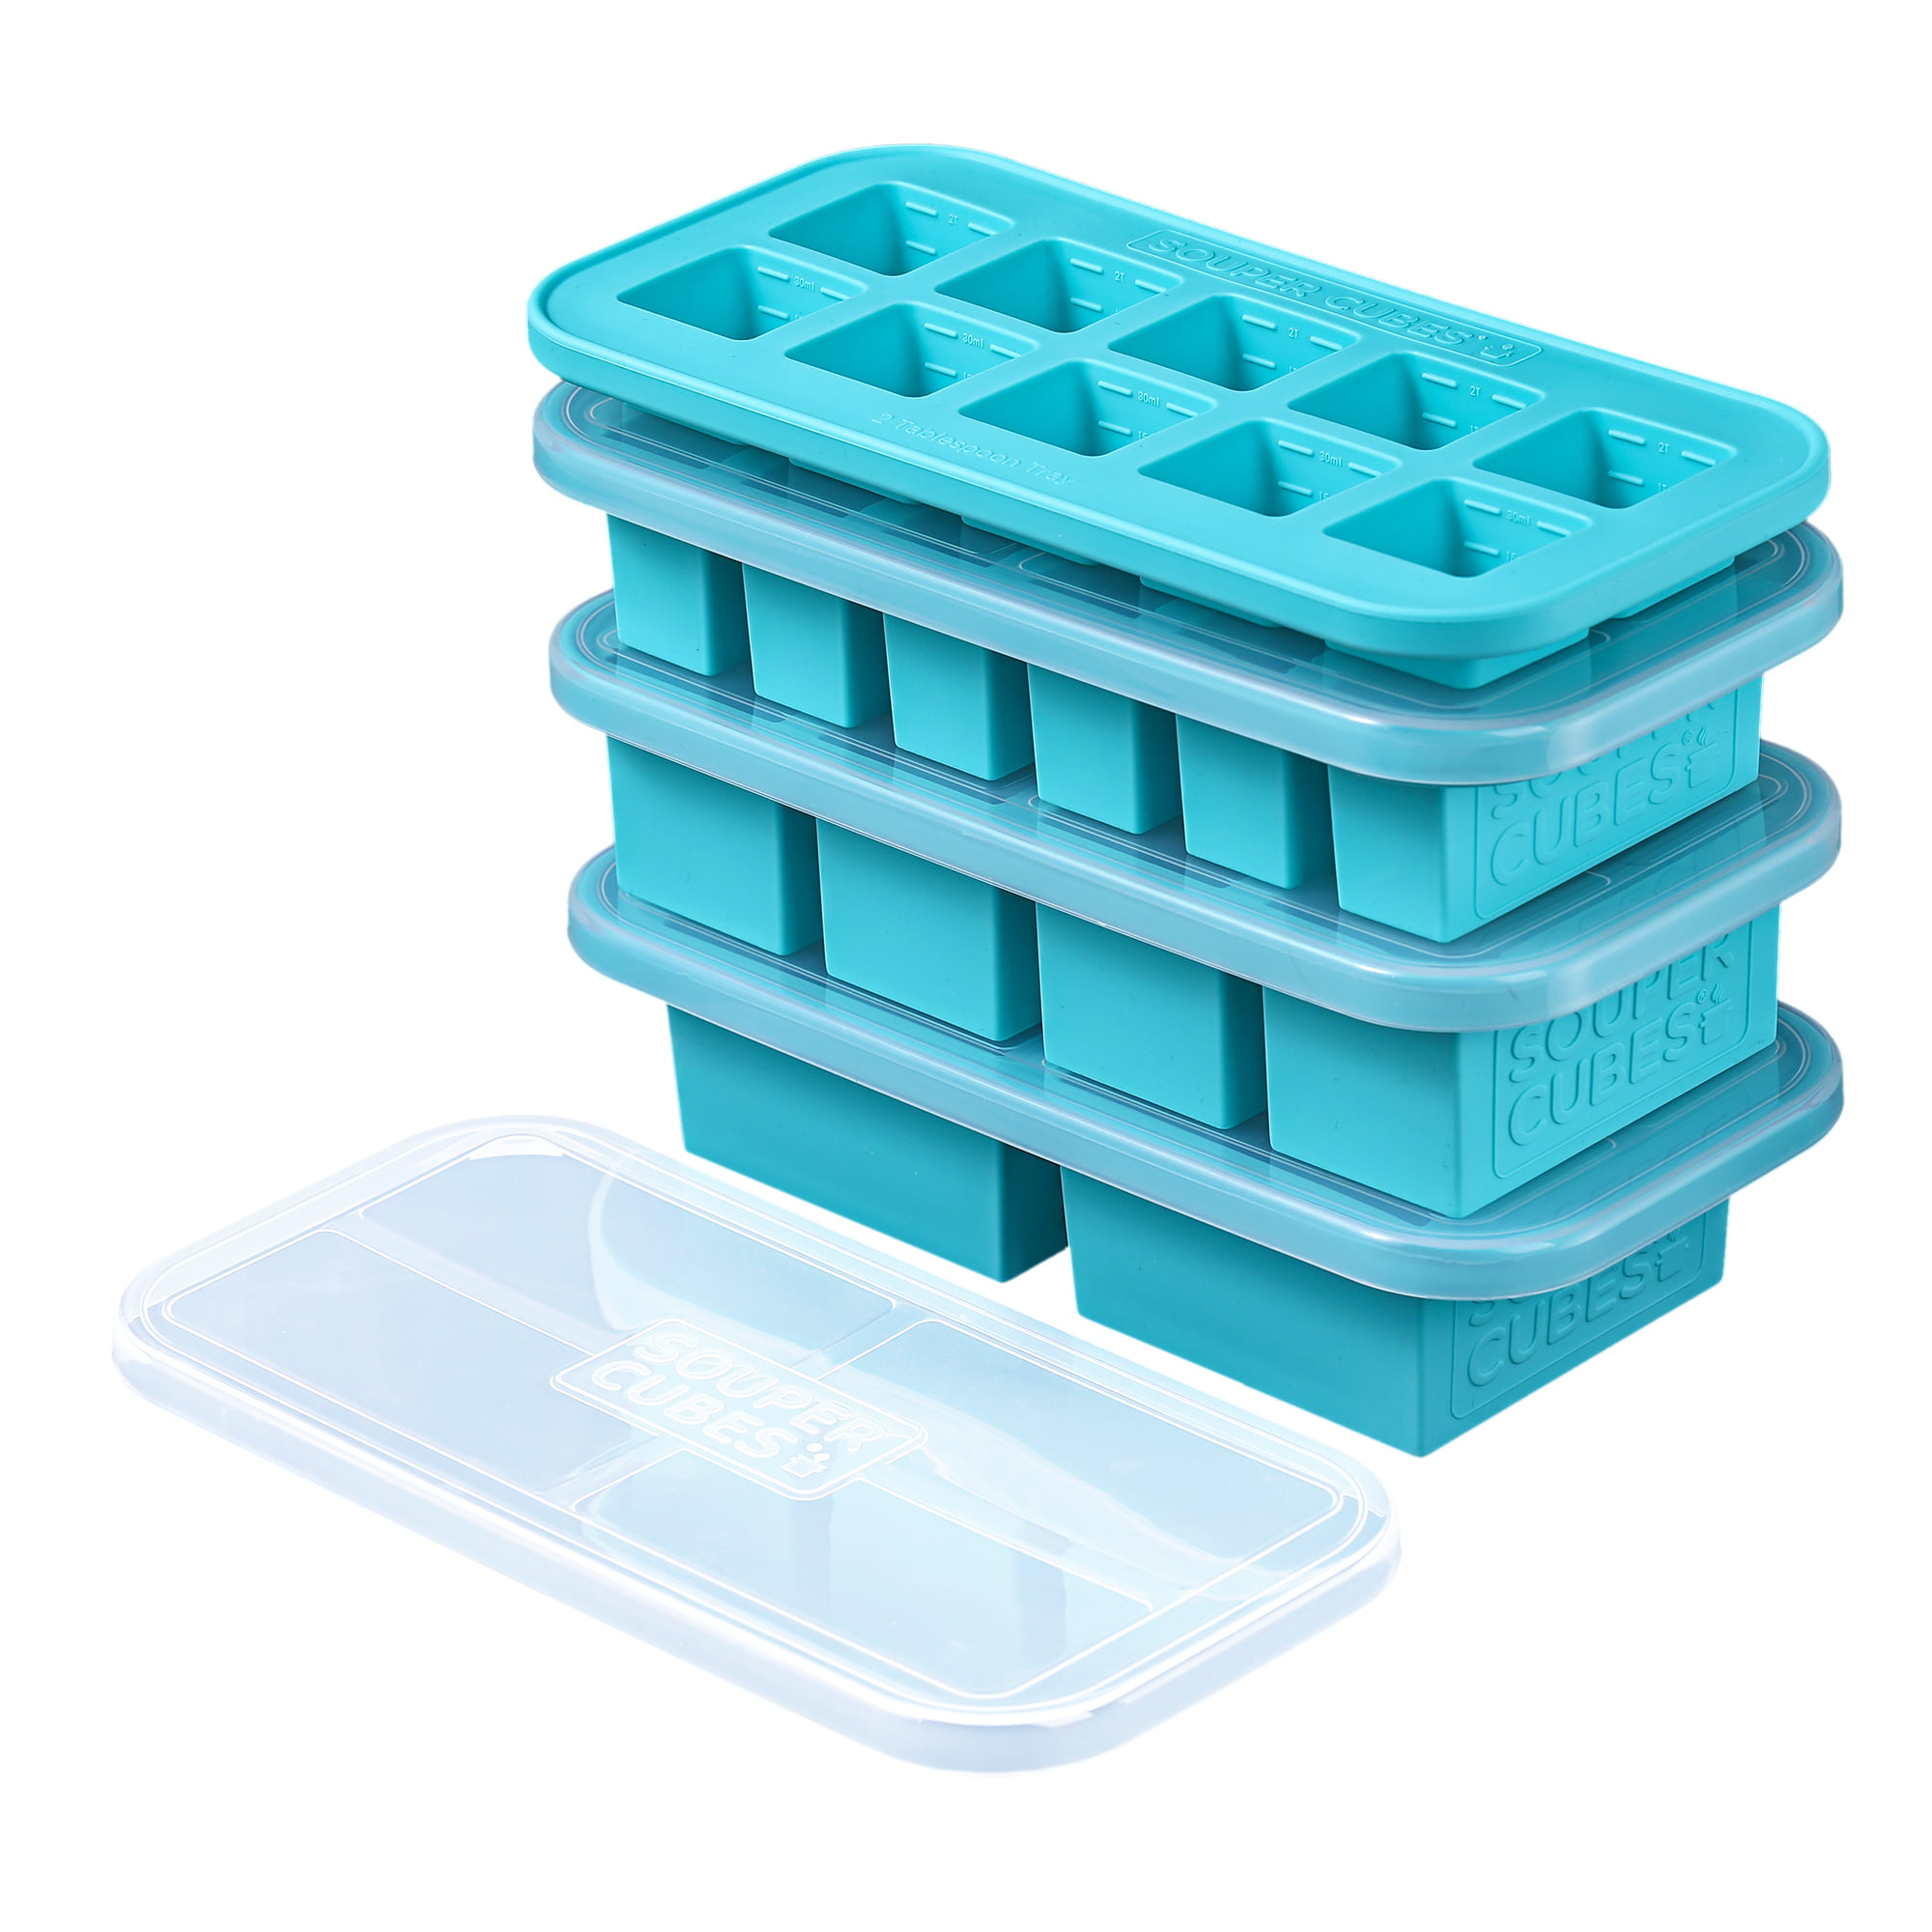 HOSNNER Silicone Freezer Trays Extra Large Soup Ice Cube Tray - 1 Pack Food Freezing Molds Makes 4 Perfect Portions 1 Cup Cube Portion Storage for Food Meal